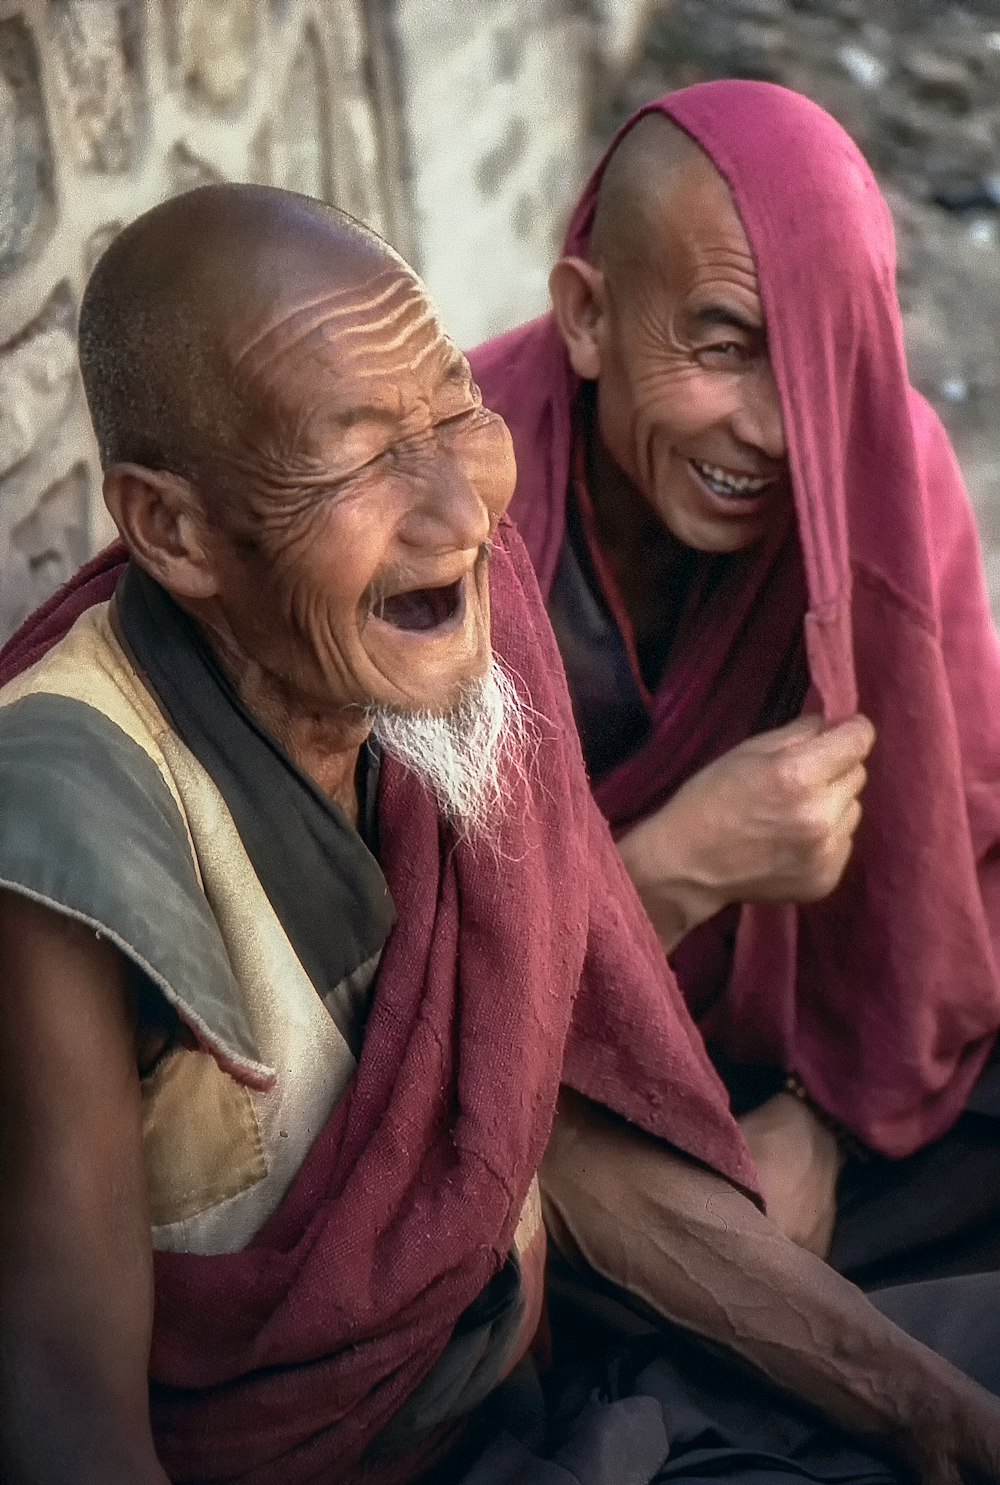 two laughing men near gray wall during daytime